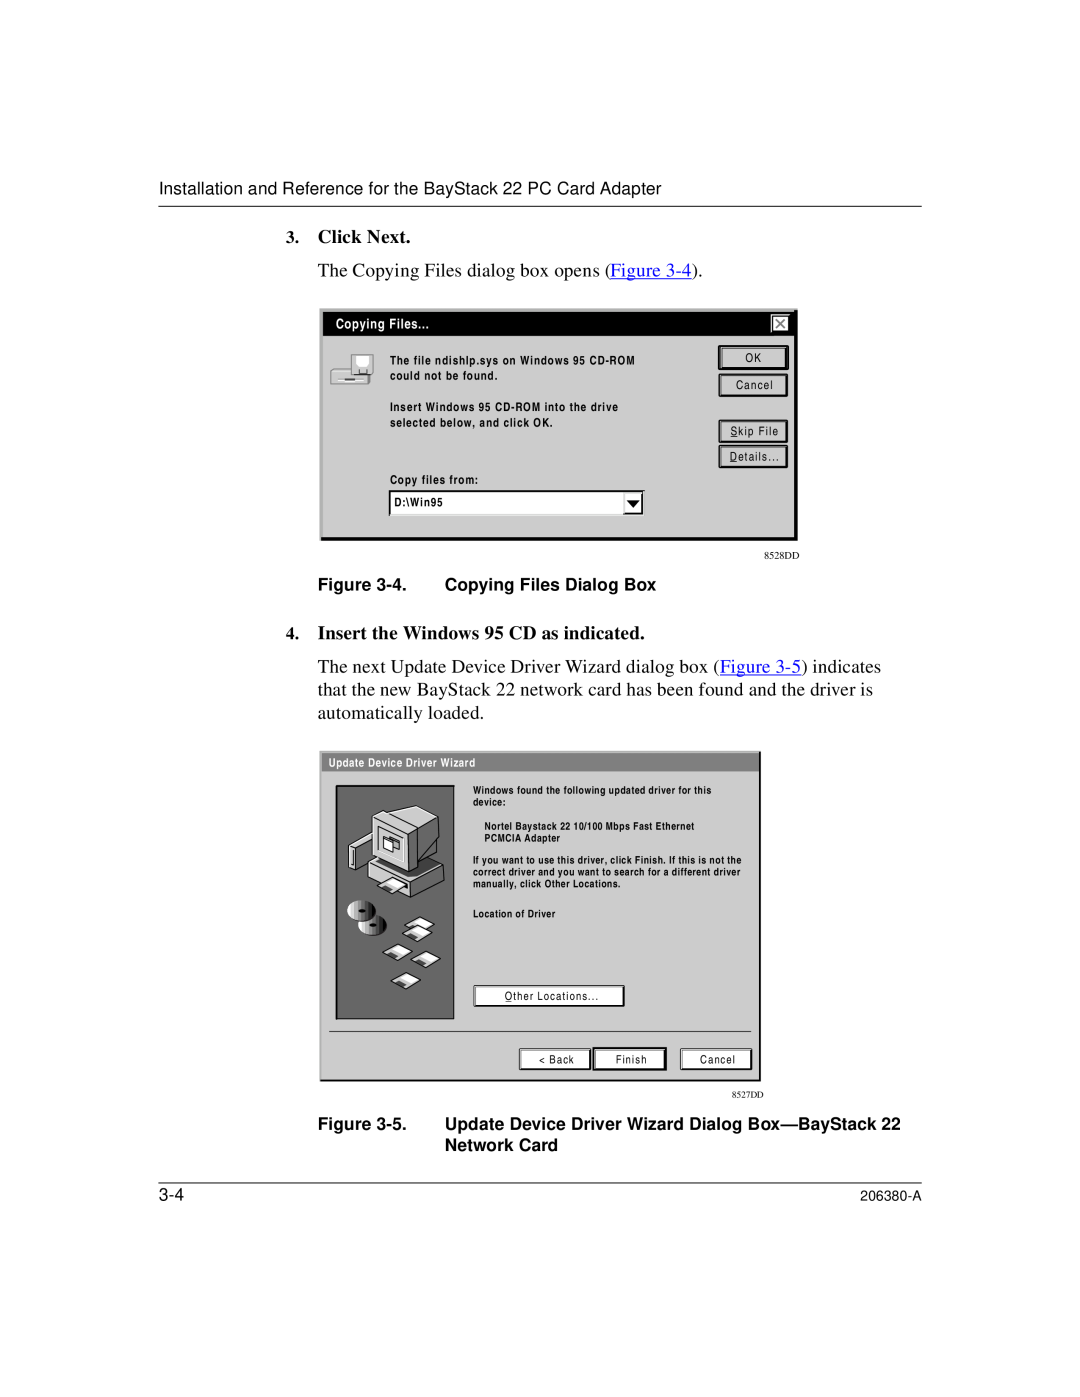 3Com 206380-A Click Next, Insert the Windows 95 CD as indicated, 4.Copying Files Dialog Box, Update Device Driver Wizard 